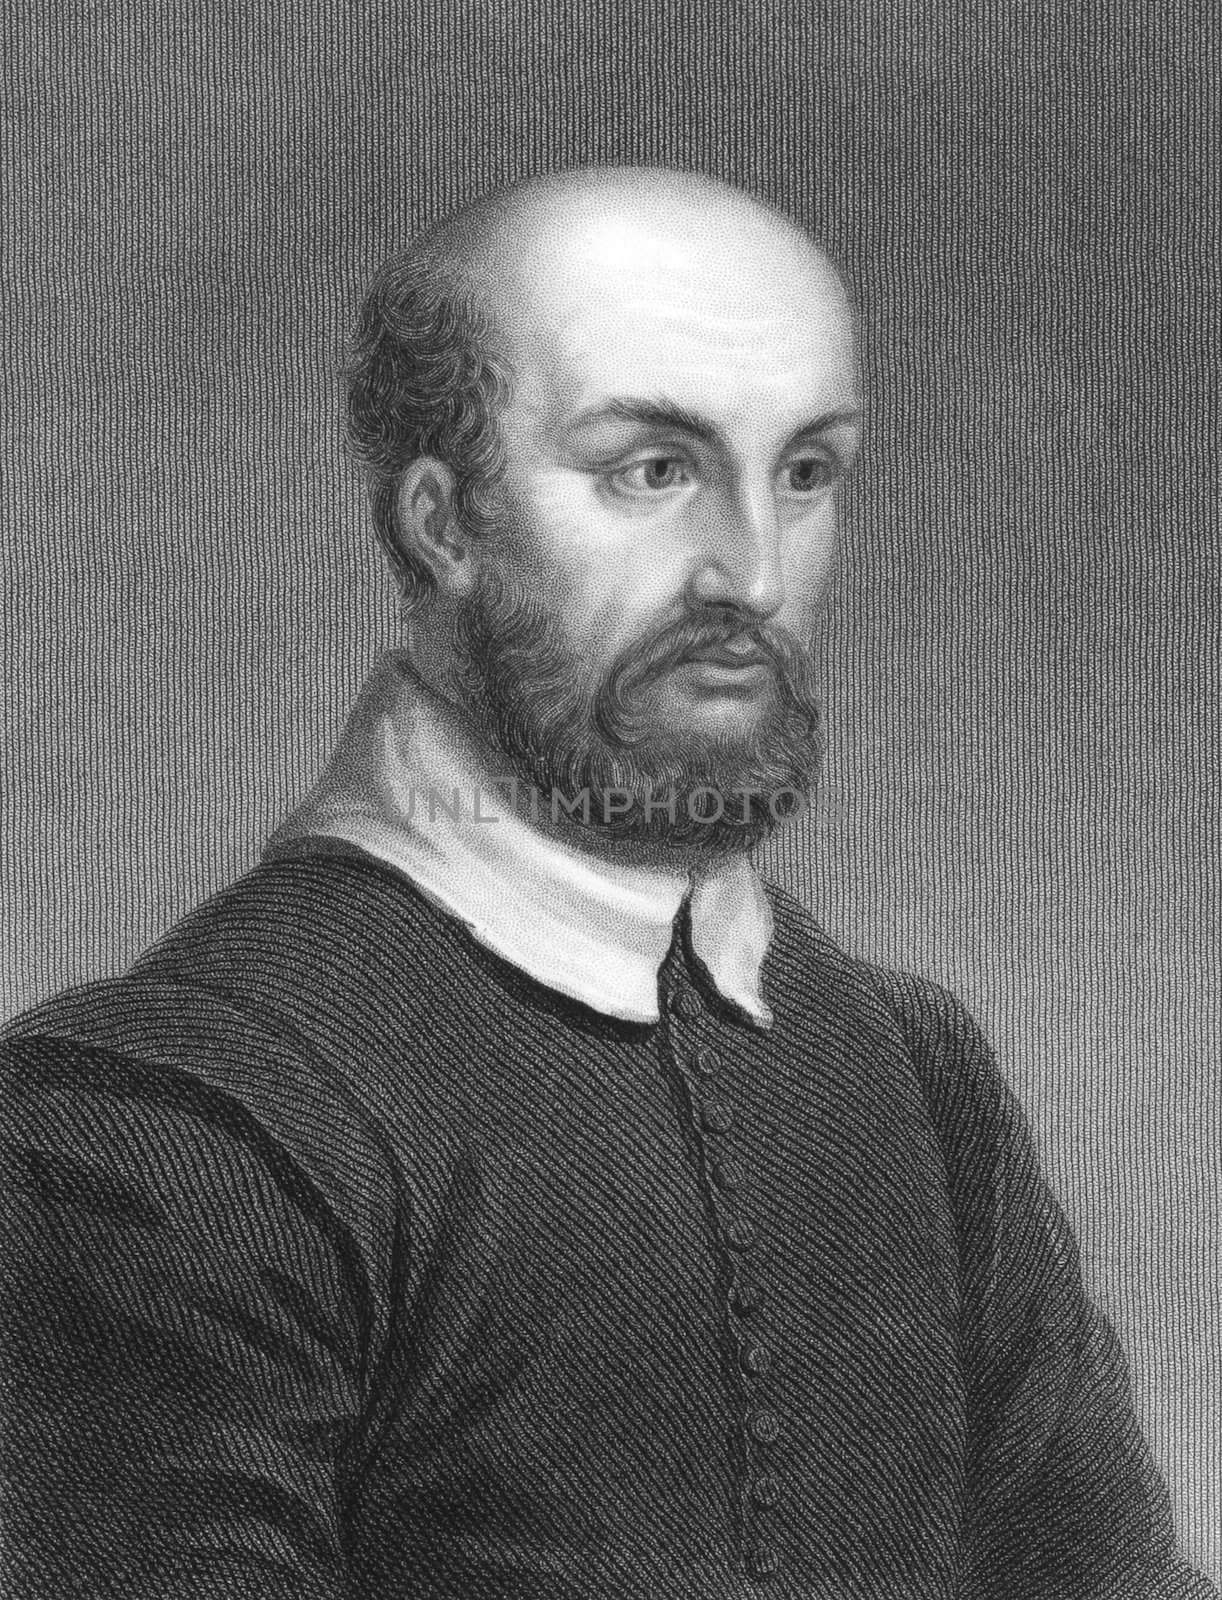 Andrea Palladio (1508-1580) on engraving from the 1800s. Italian Renaissance architect. Engraved by R.Woodman from a picture by Bigleoschi and published in London by Charles Knight, Ludgate Street.